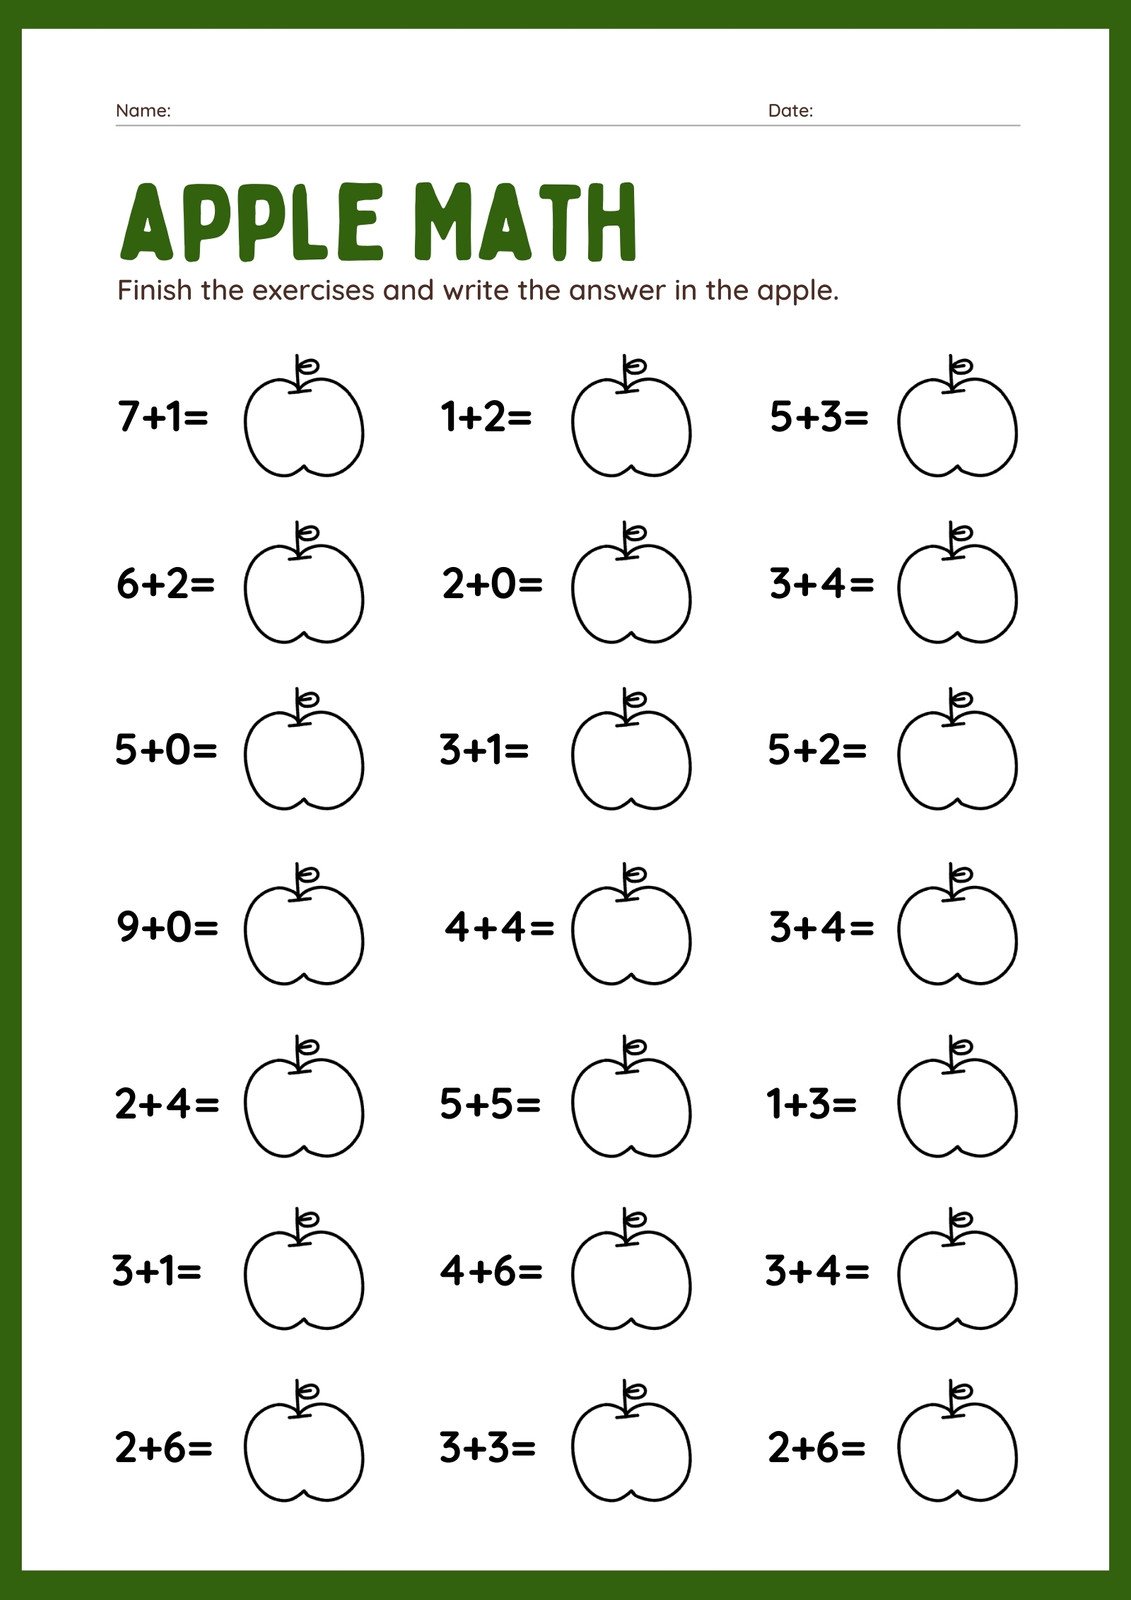 free-math-worksheets-by-math-drills-free-math-worksheets-by-math